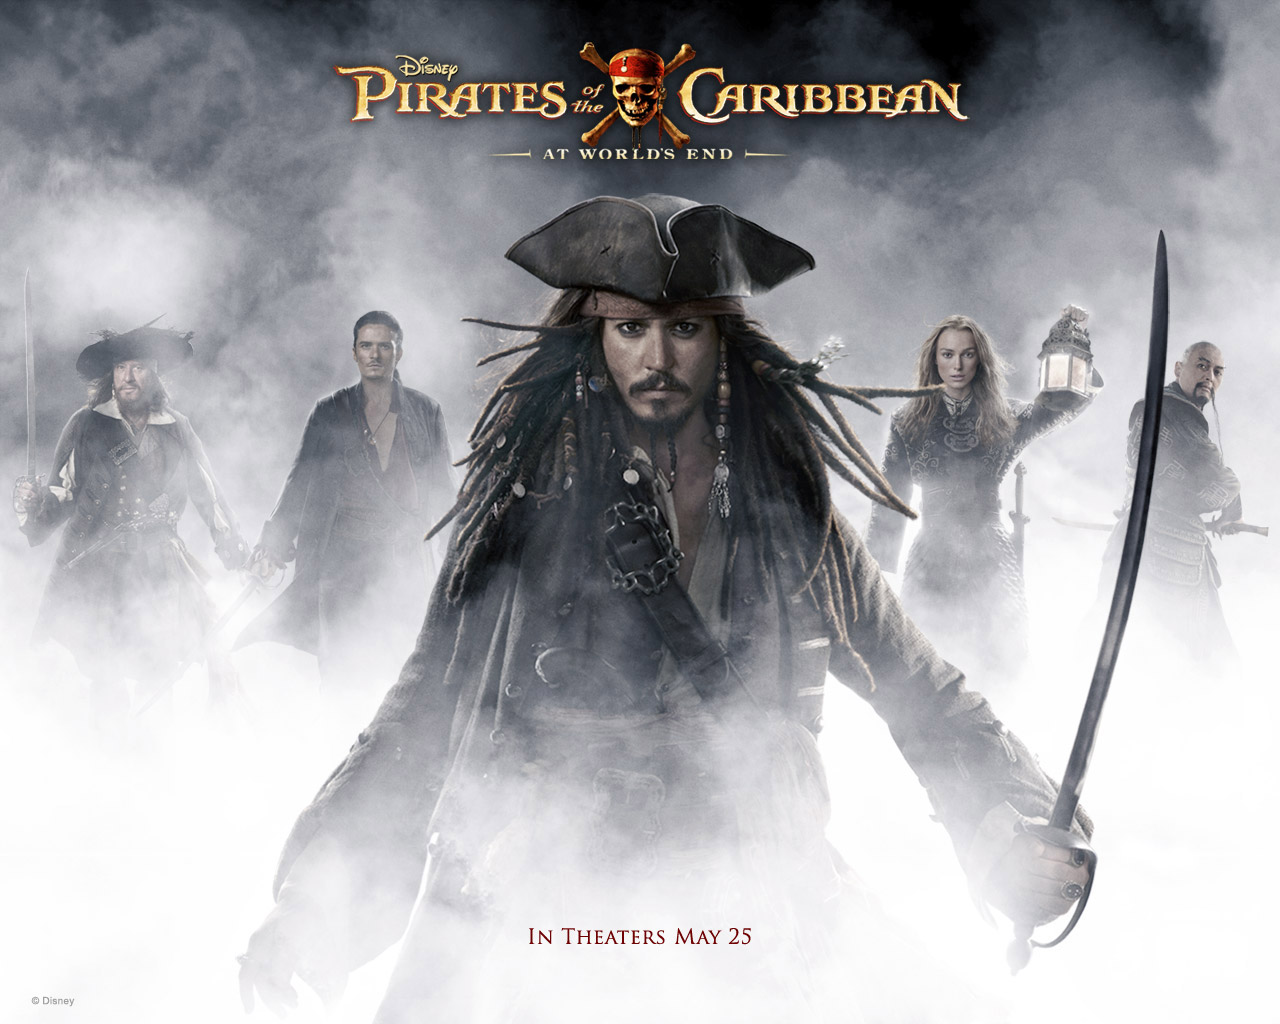 pirates of the caribbean wallpaper,album cover,outerwear,graphics,movie,cg artwork